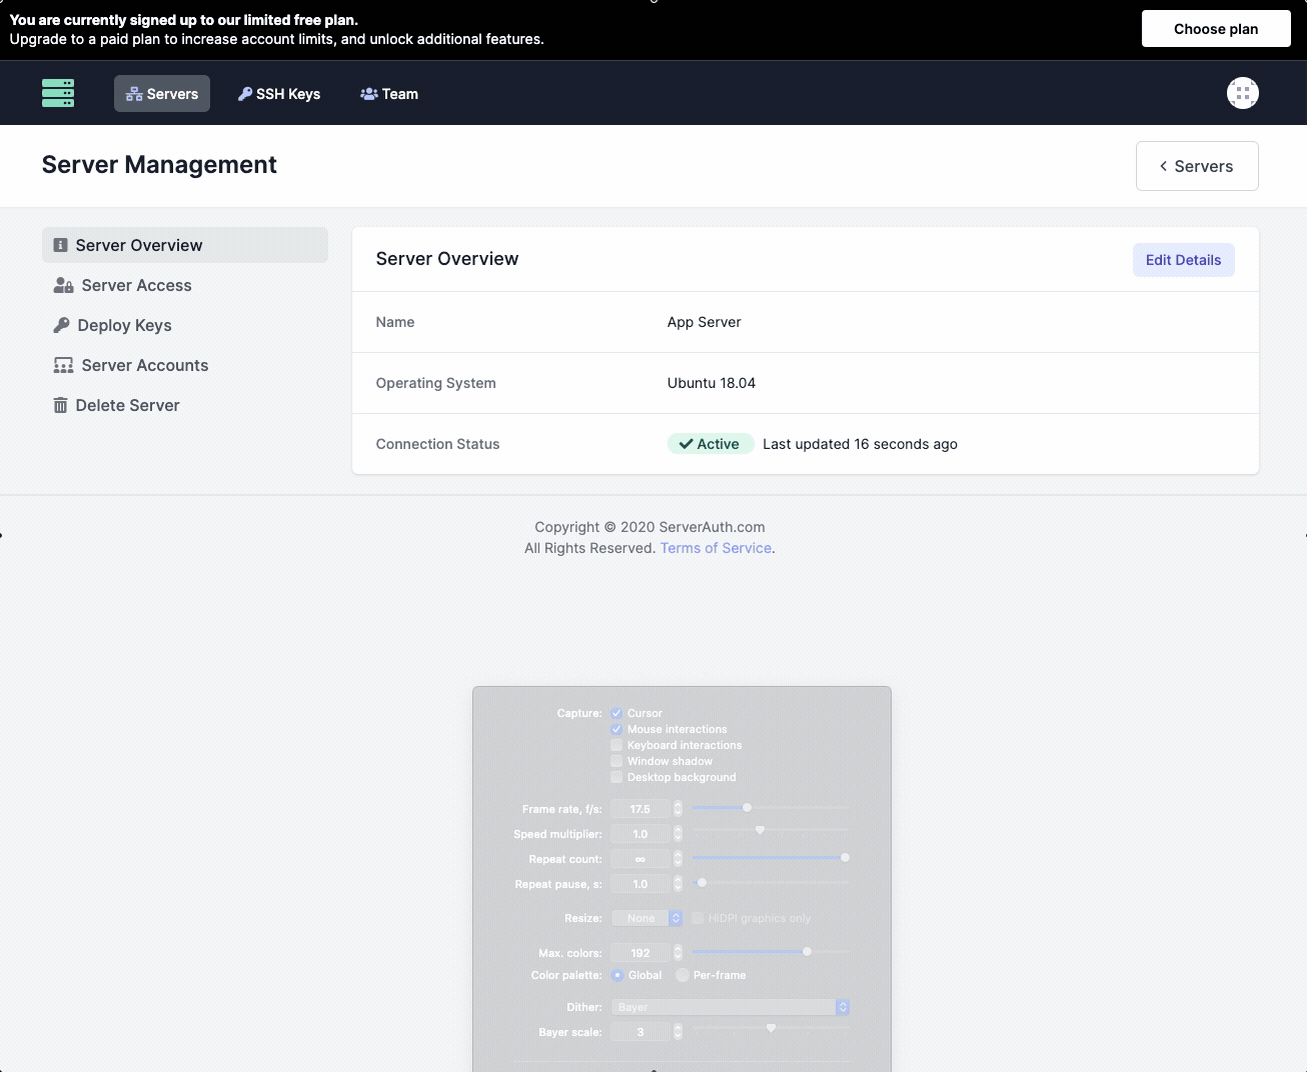 Animated GIF showing editing server details